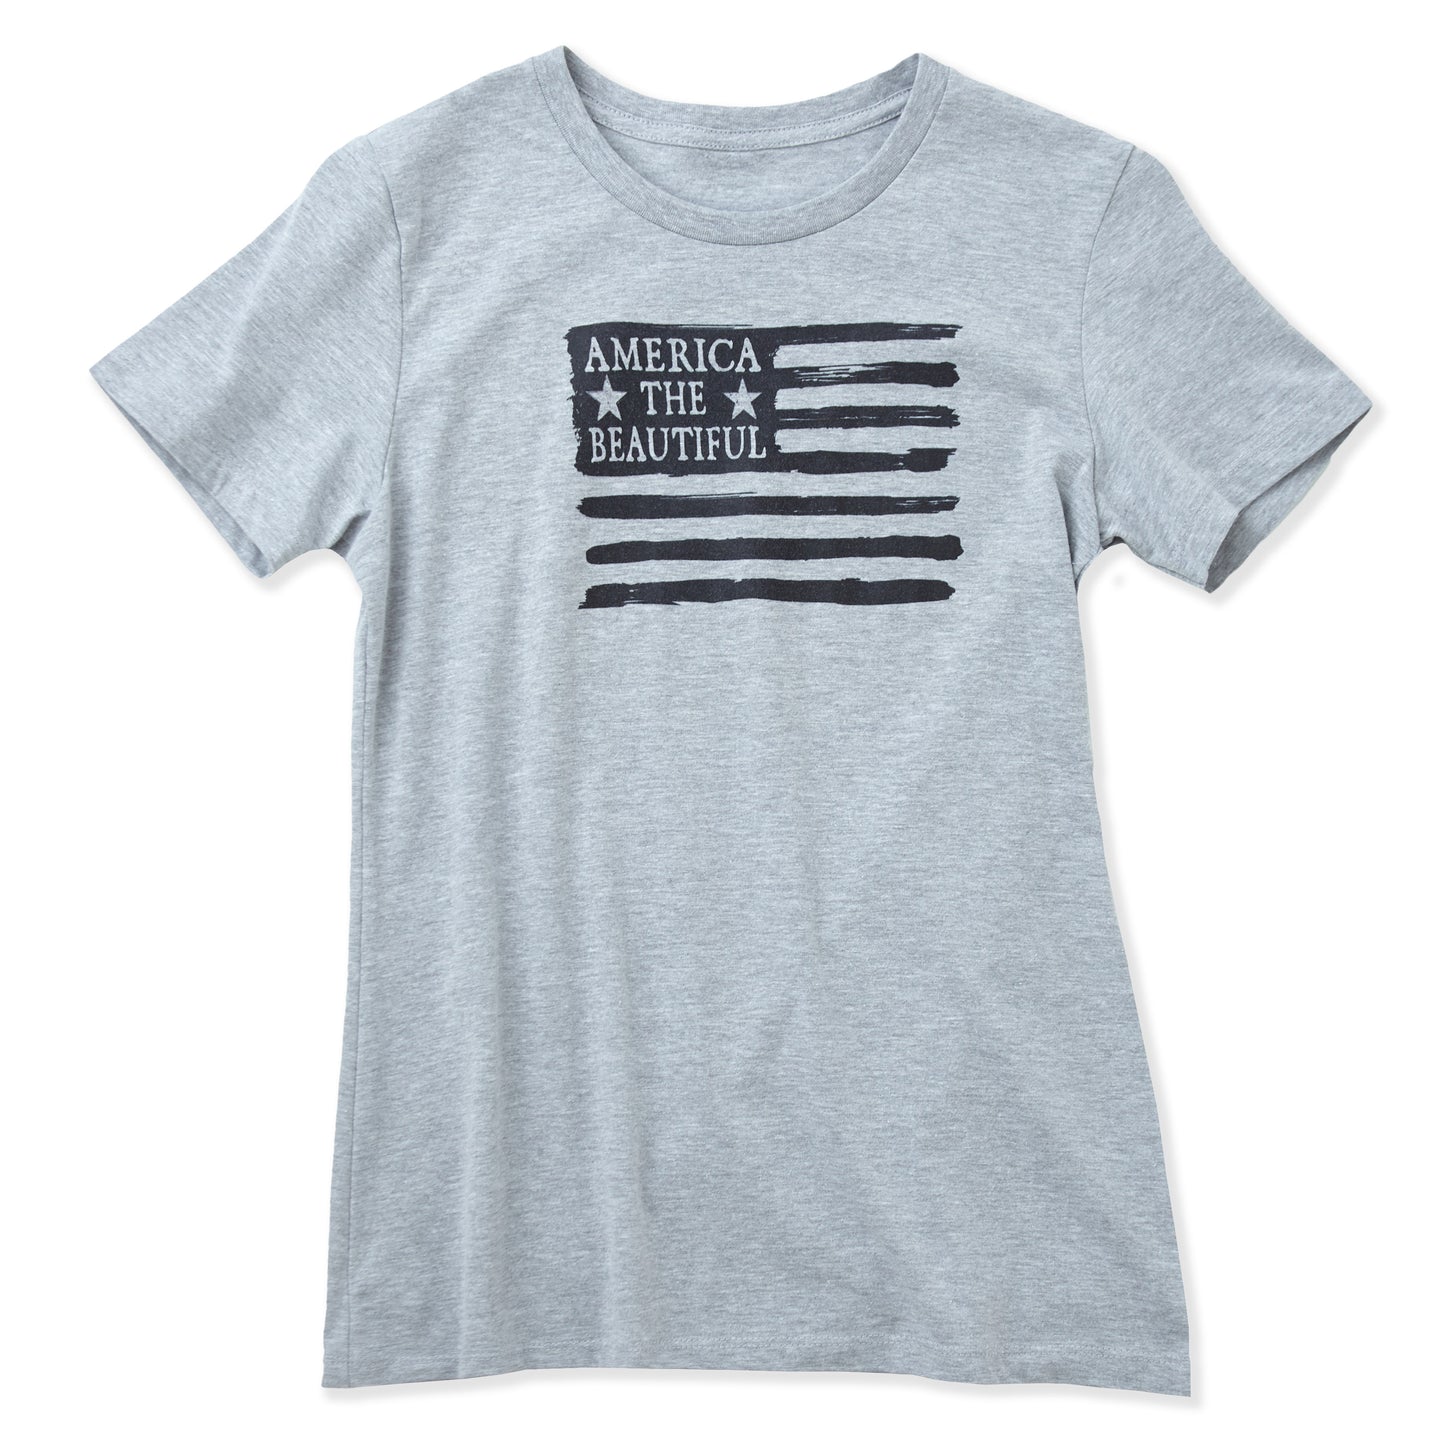 American Flag Weathered Grunge Style on Grey Womens Short Sleeve Graphic Tee